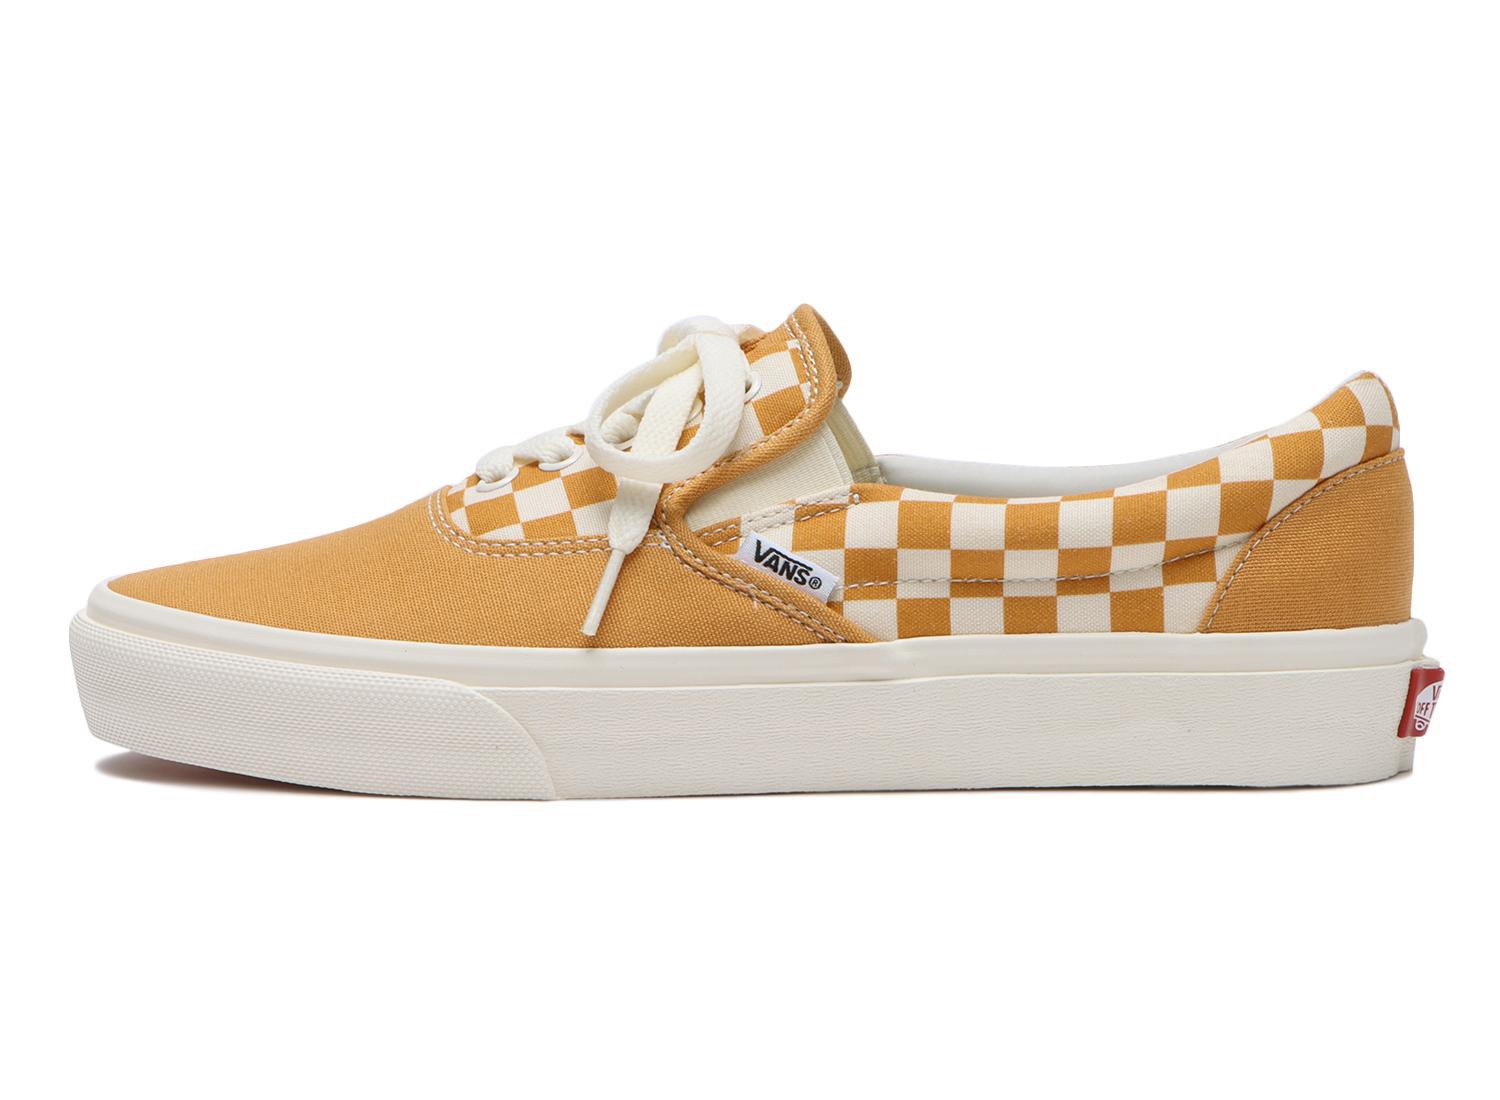 Vans' Erap sneaker that combines the Era and Slip-On sneakers in blue, black, and yellow checkerboard